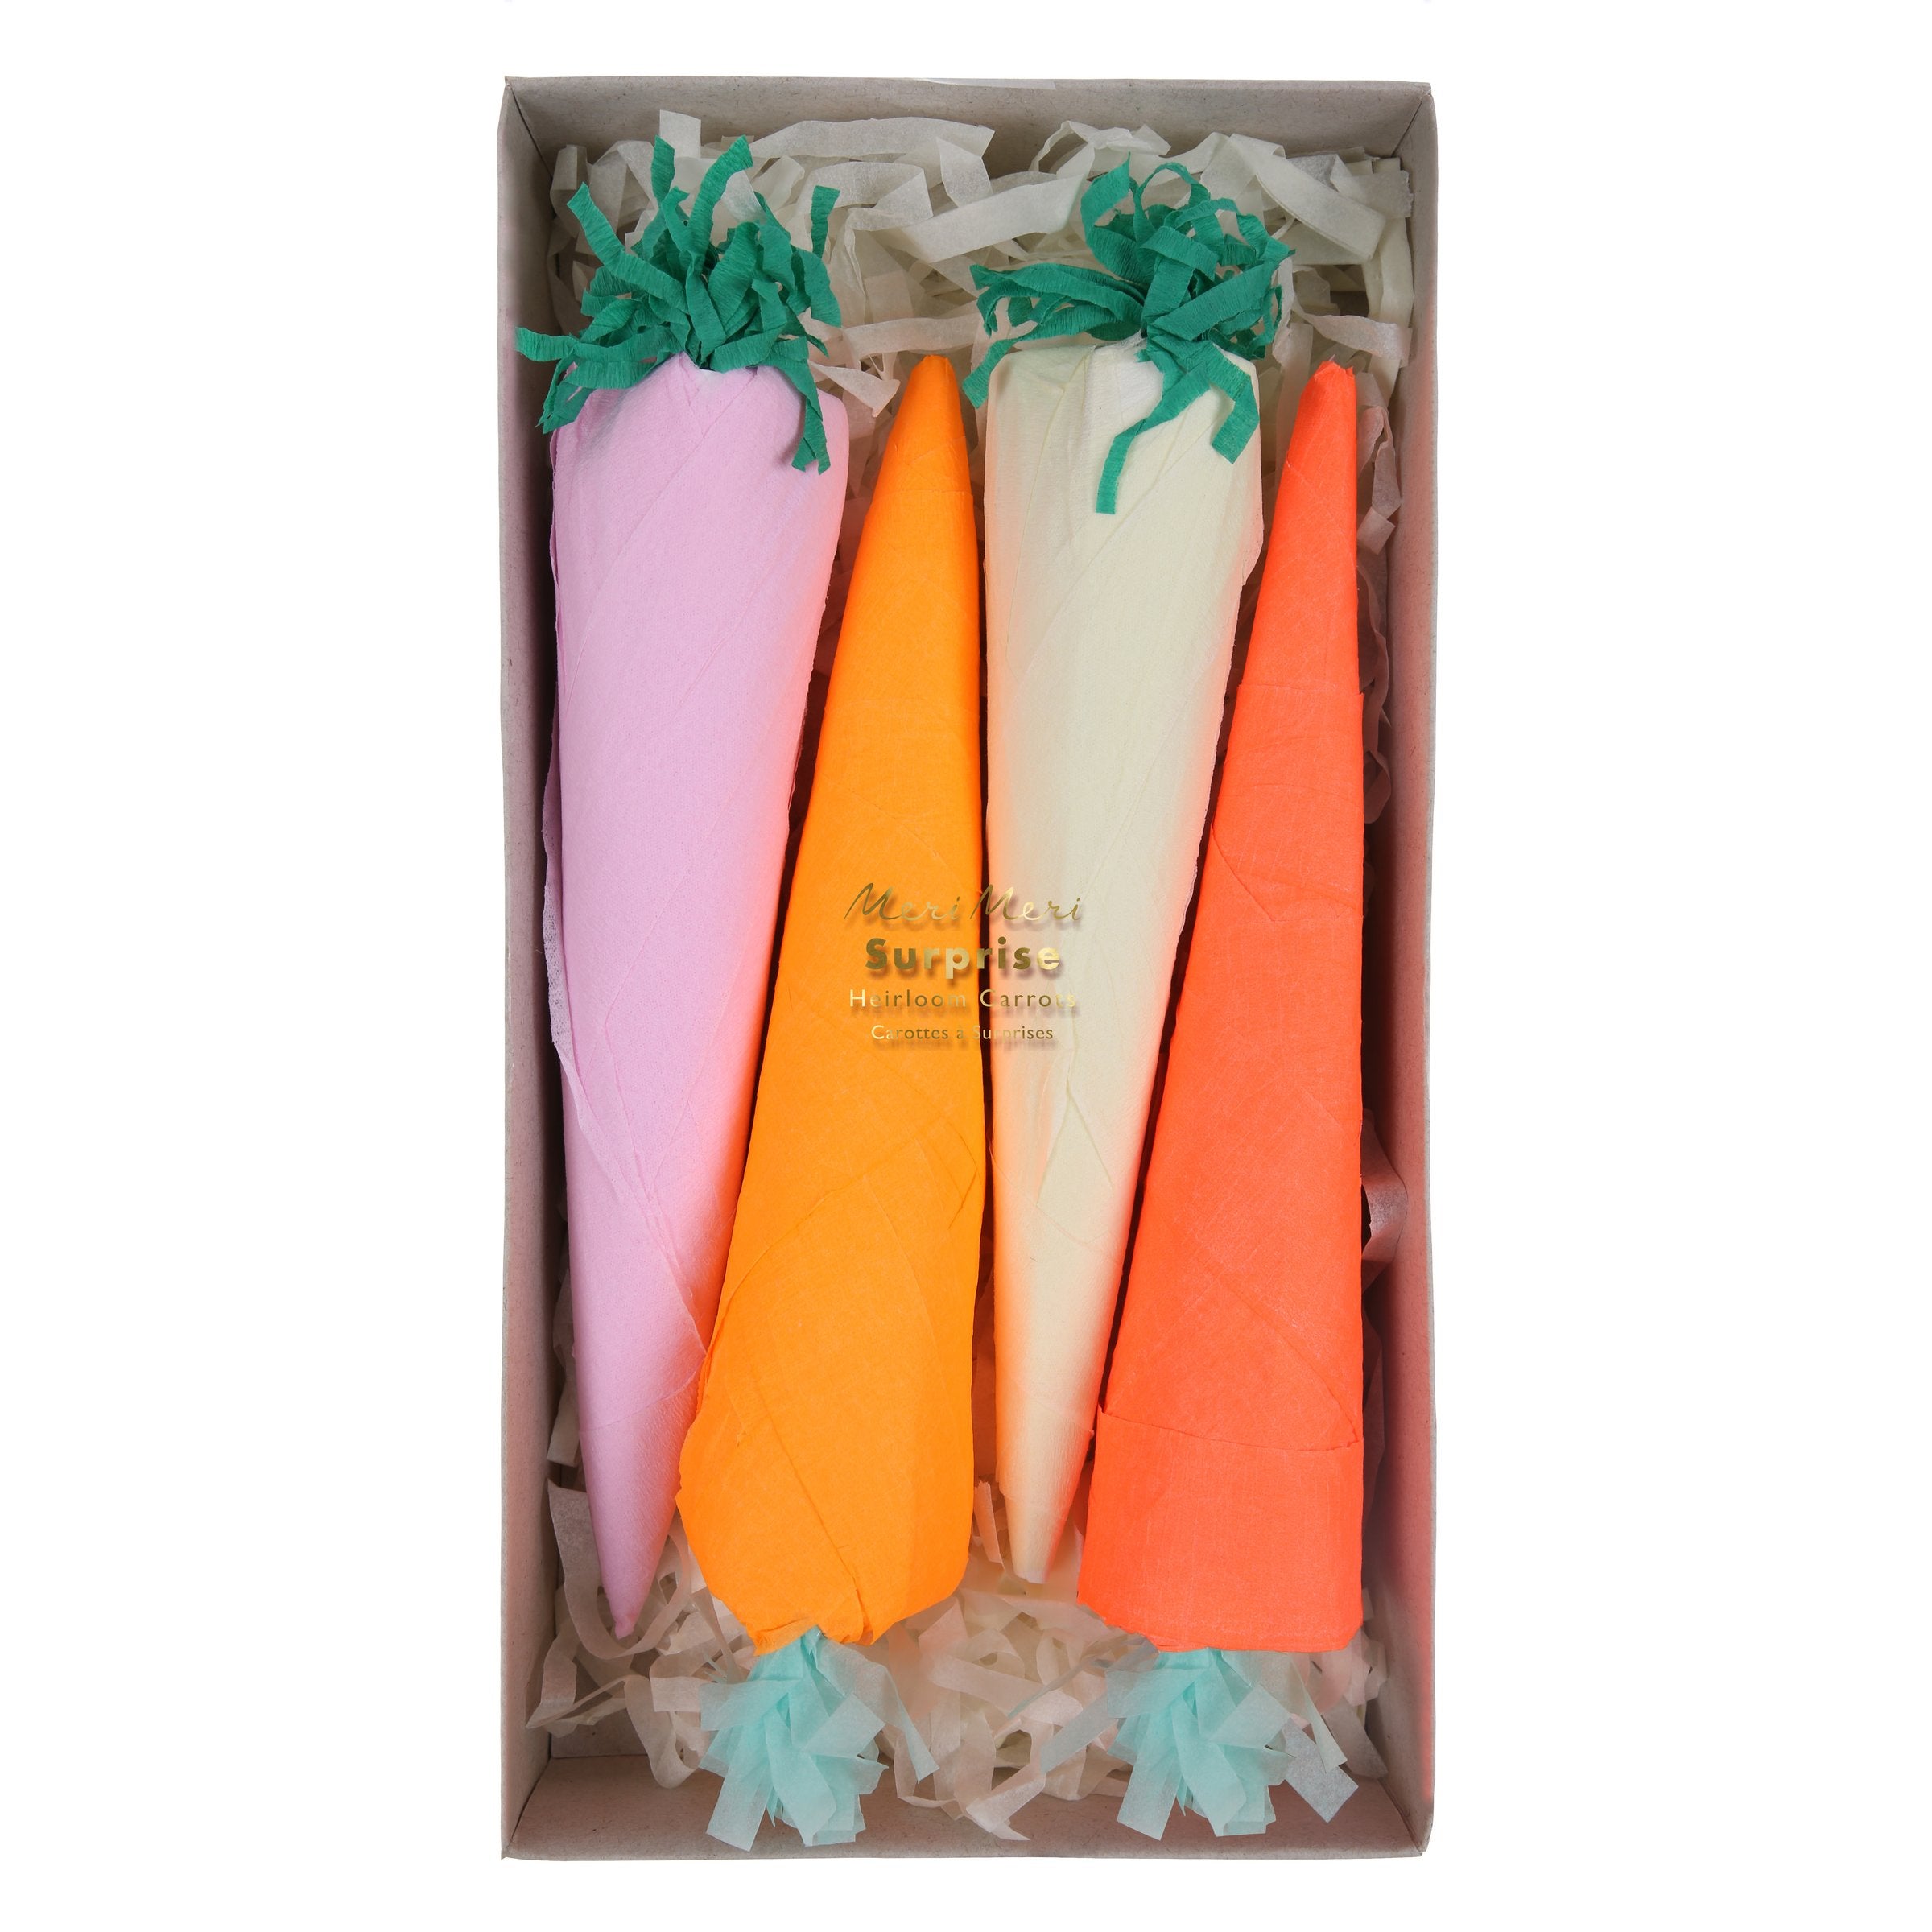 These surprise carrots are crafted from colourful crepe paper, and each contain a fluffy chick, 2 tempororary tattoos and a joke